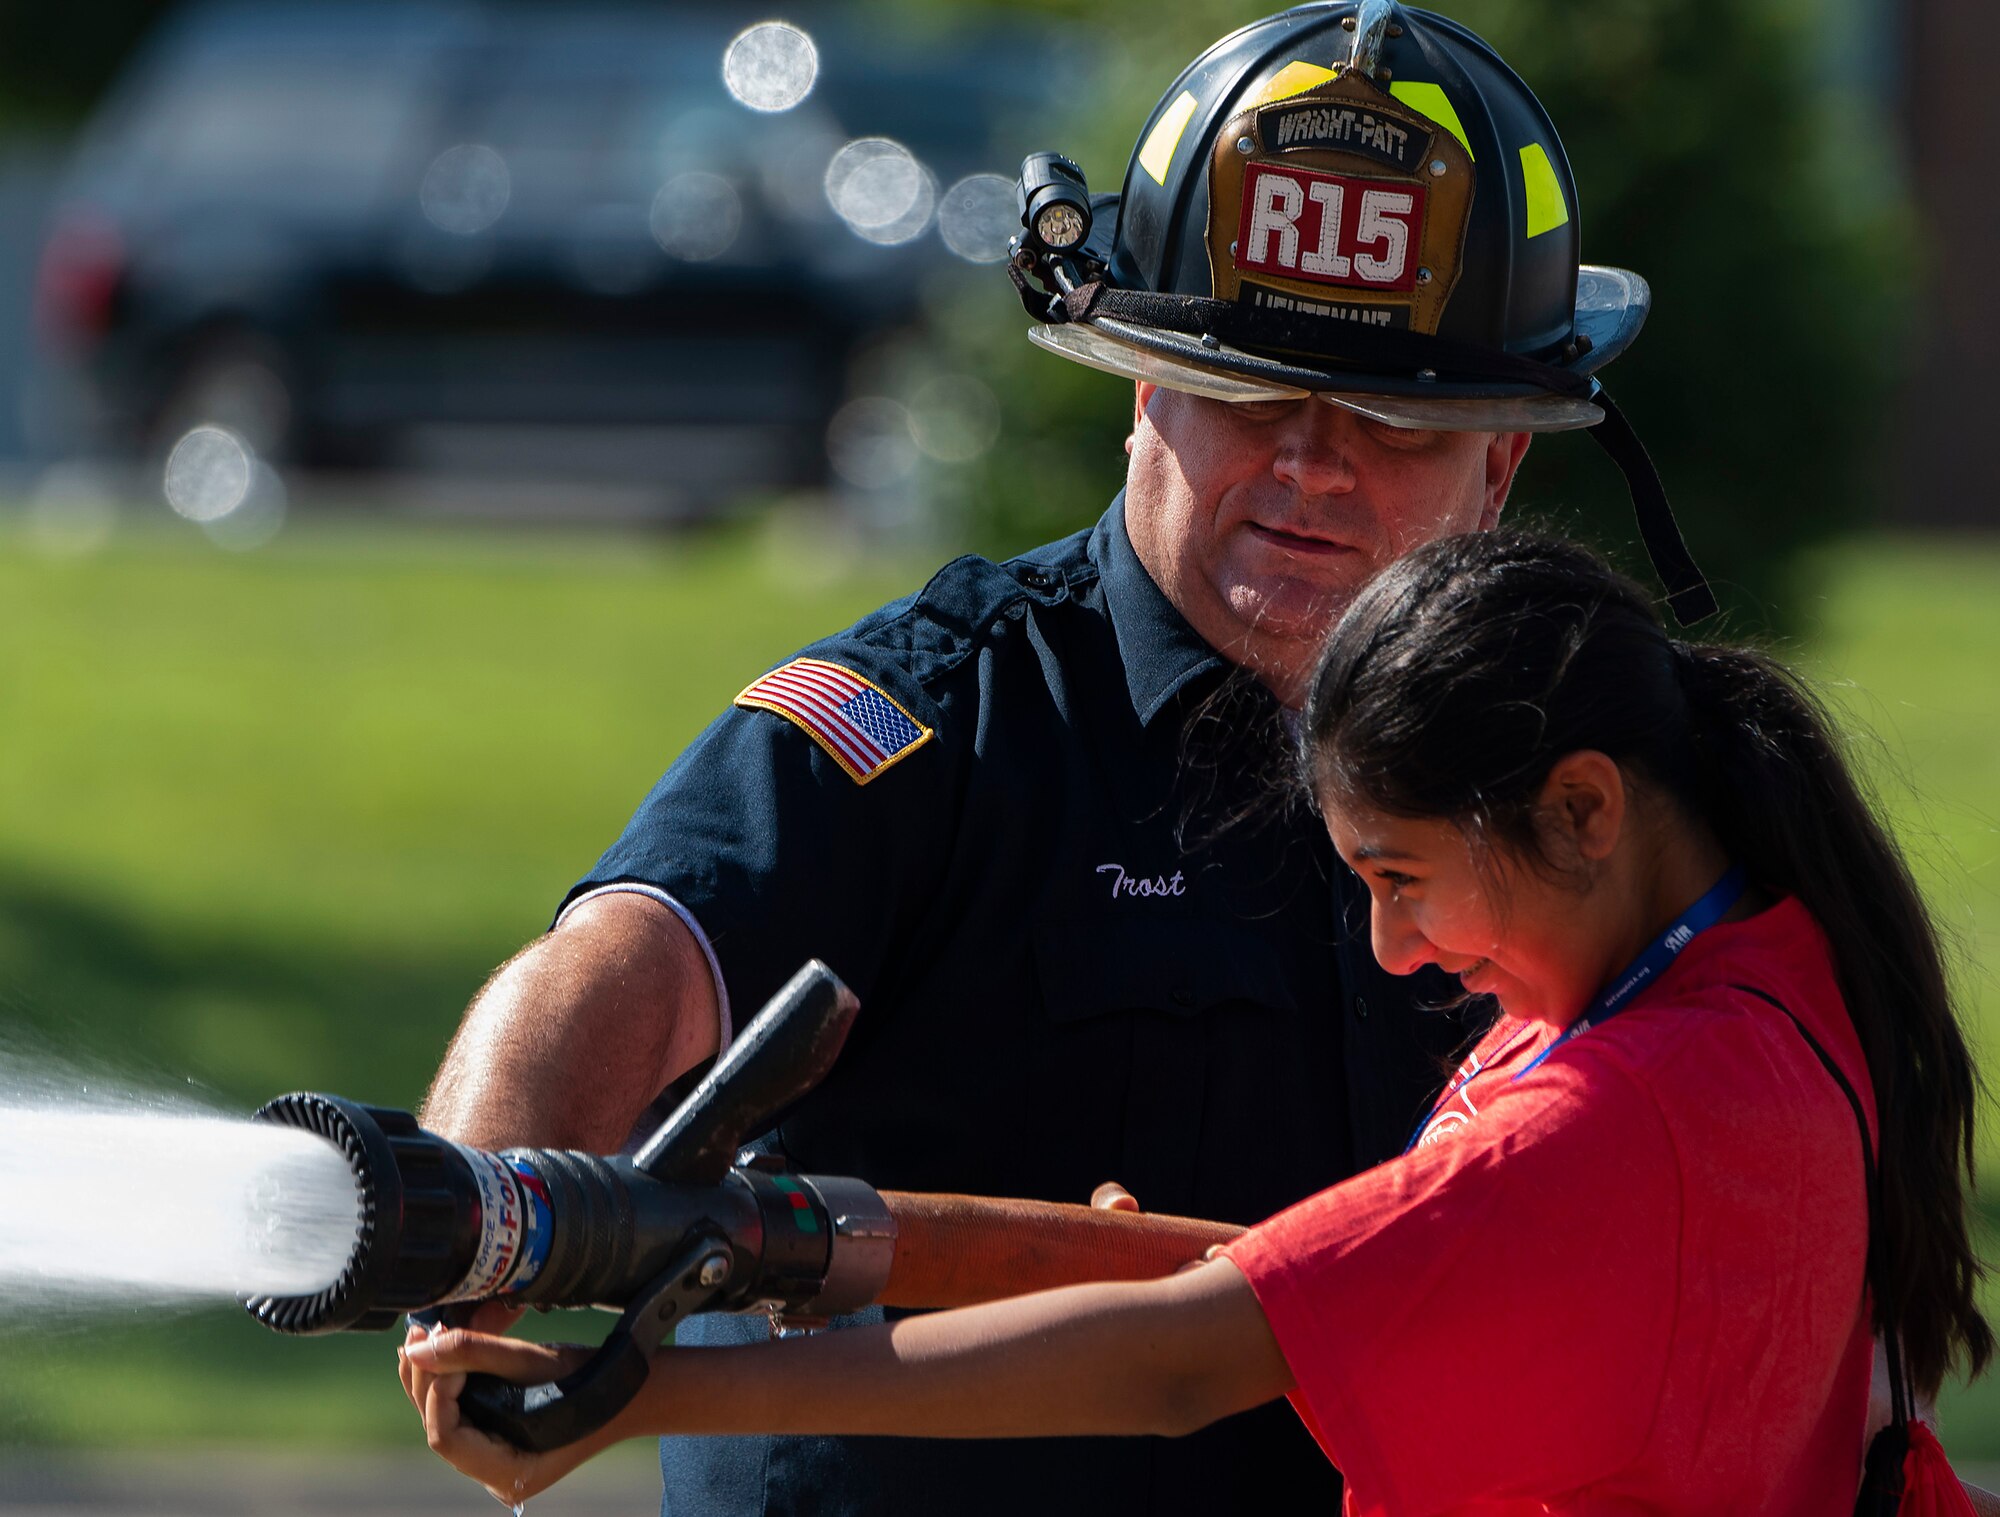 A camper handles a fire hose with the help of firefighter Thomas Trost, 788th Civil Engineer Squadron, at the main fire station on Wright-Patterson Air Force Base, Ohio, June 15, 2021. Air Camp participants came to Wright-Patt to tour aircraft, learn about firefighting and visit the U.S. Air Force School of Aerospace Medicine. (U.S. Air Force photo by R.J. Oriez)